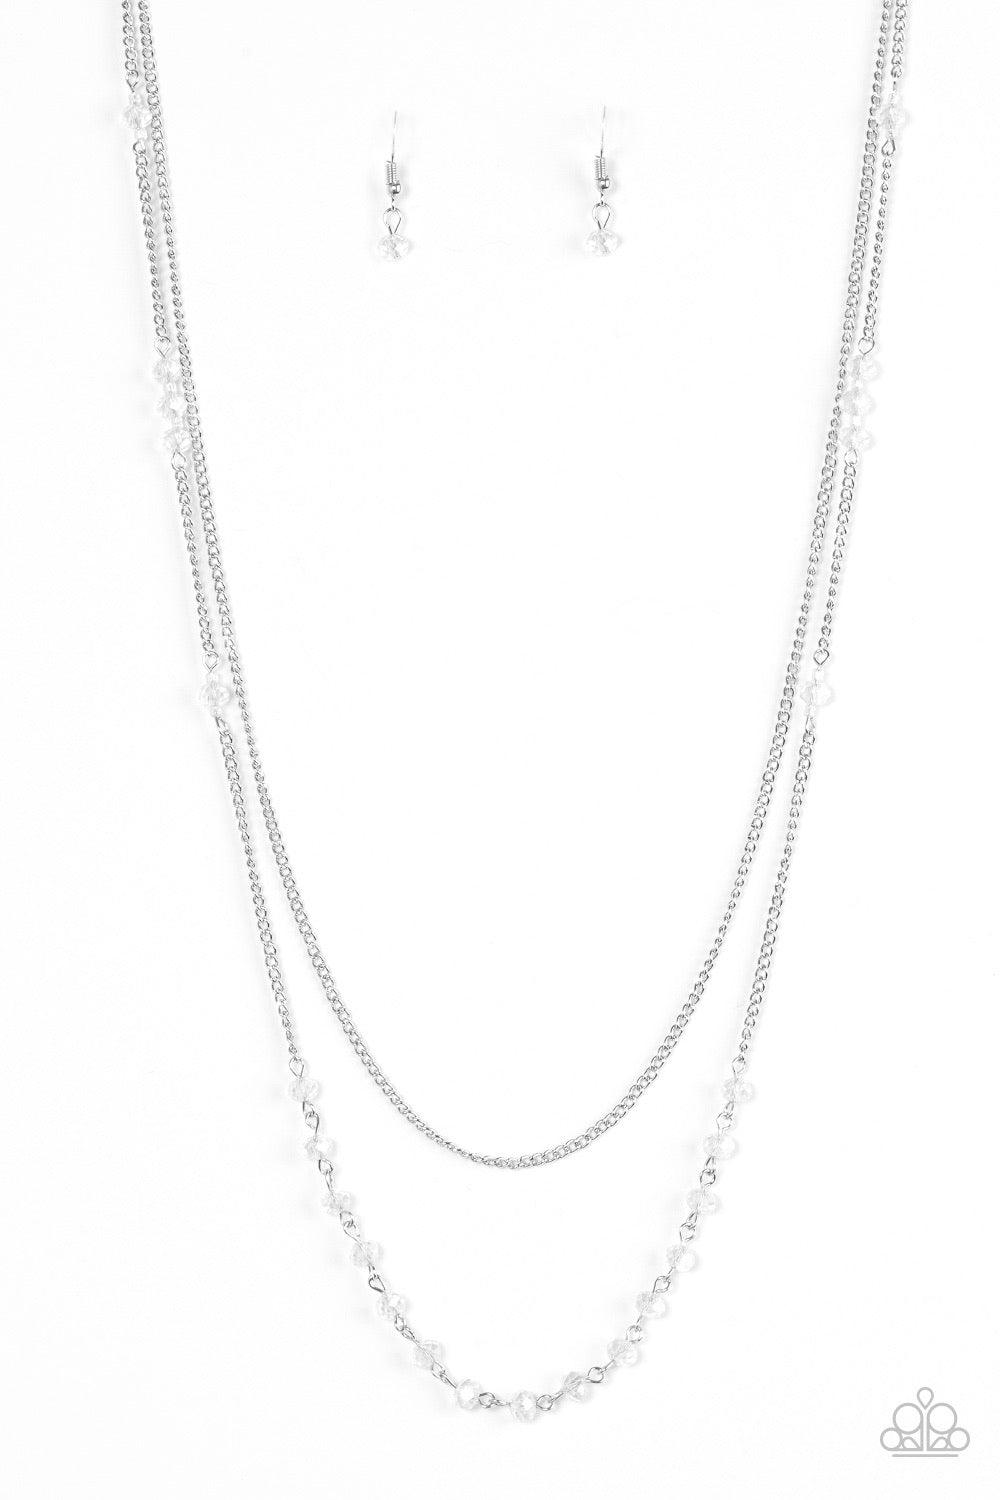 Paparazzi Accessories Rich With Glitz - White Brushed in an iridescent finish, white crystal-like beads trickle along a shimmery silver chain. A plain silver chain hangs above the glittery beads for a refined layered finish. Features an adjustable clasp c